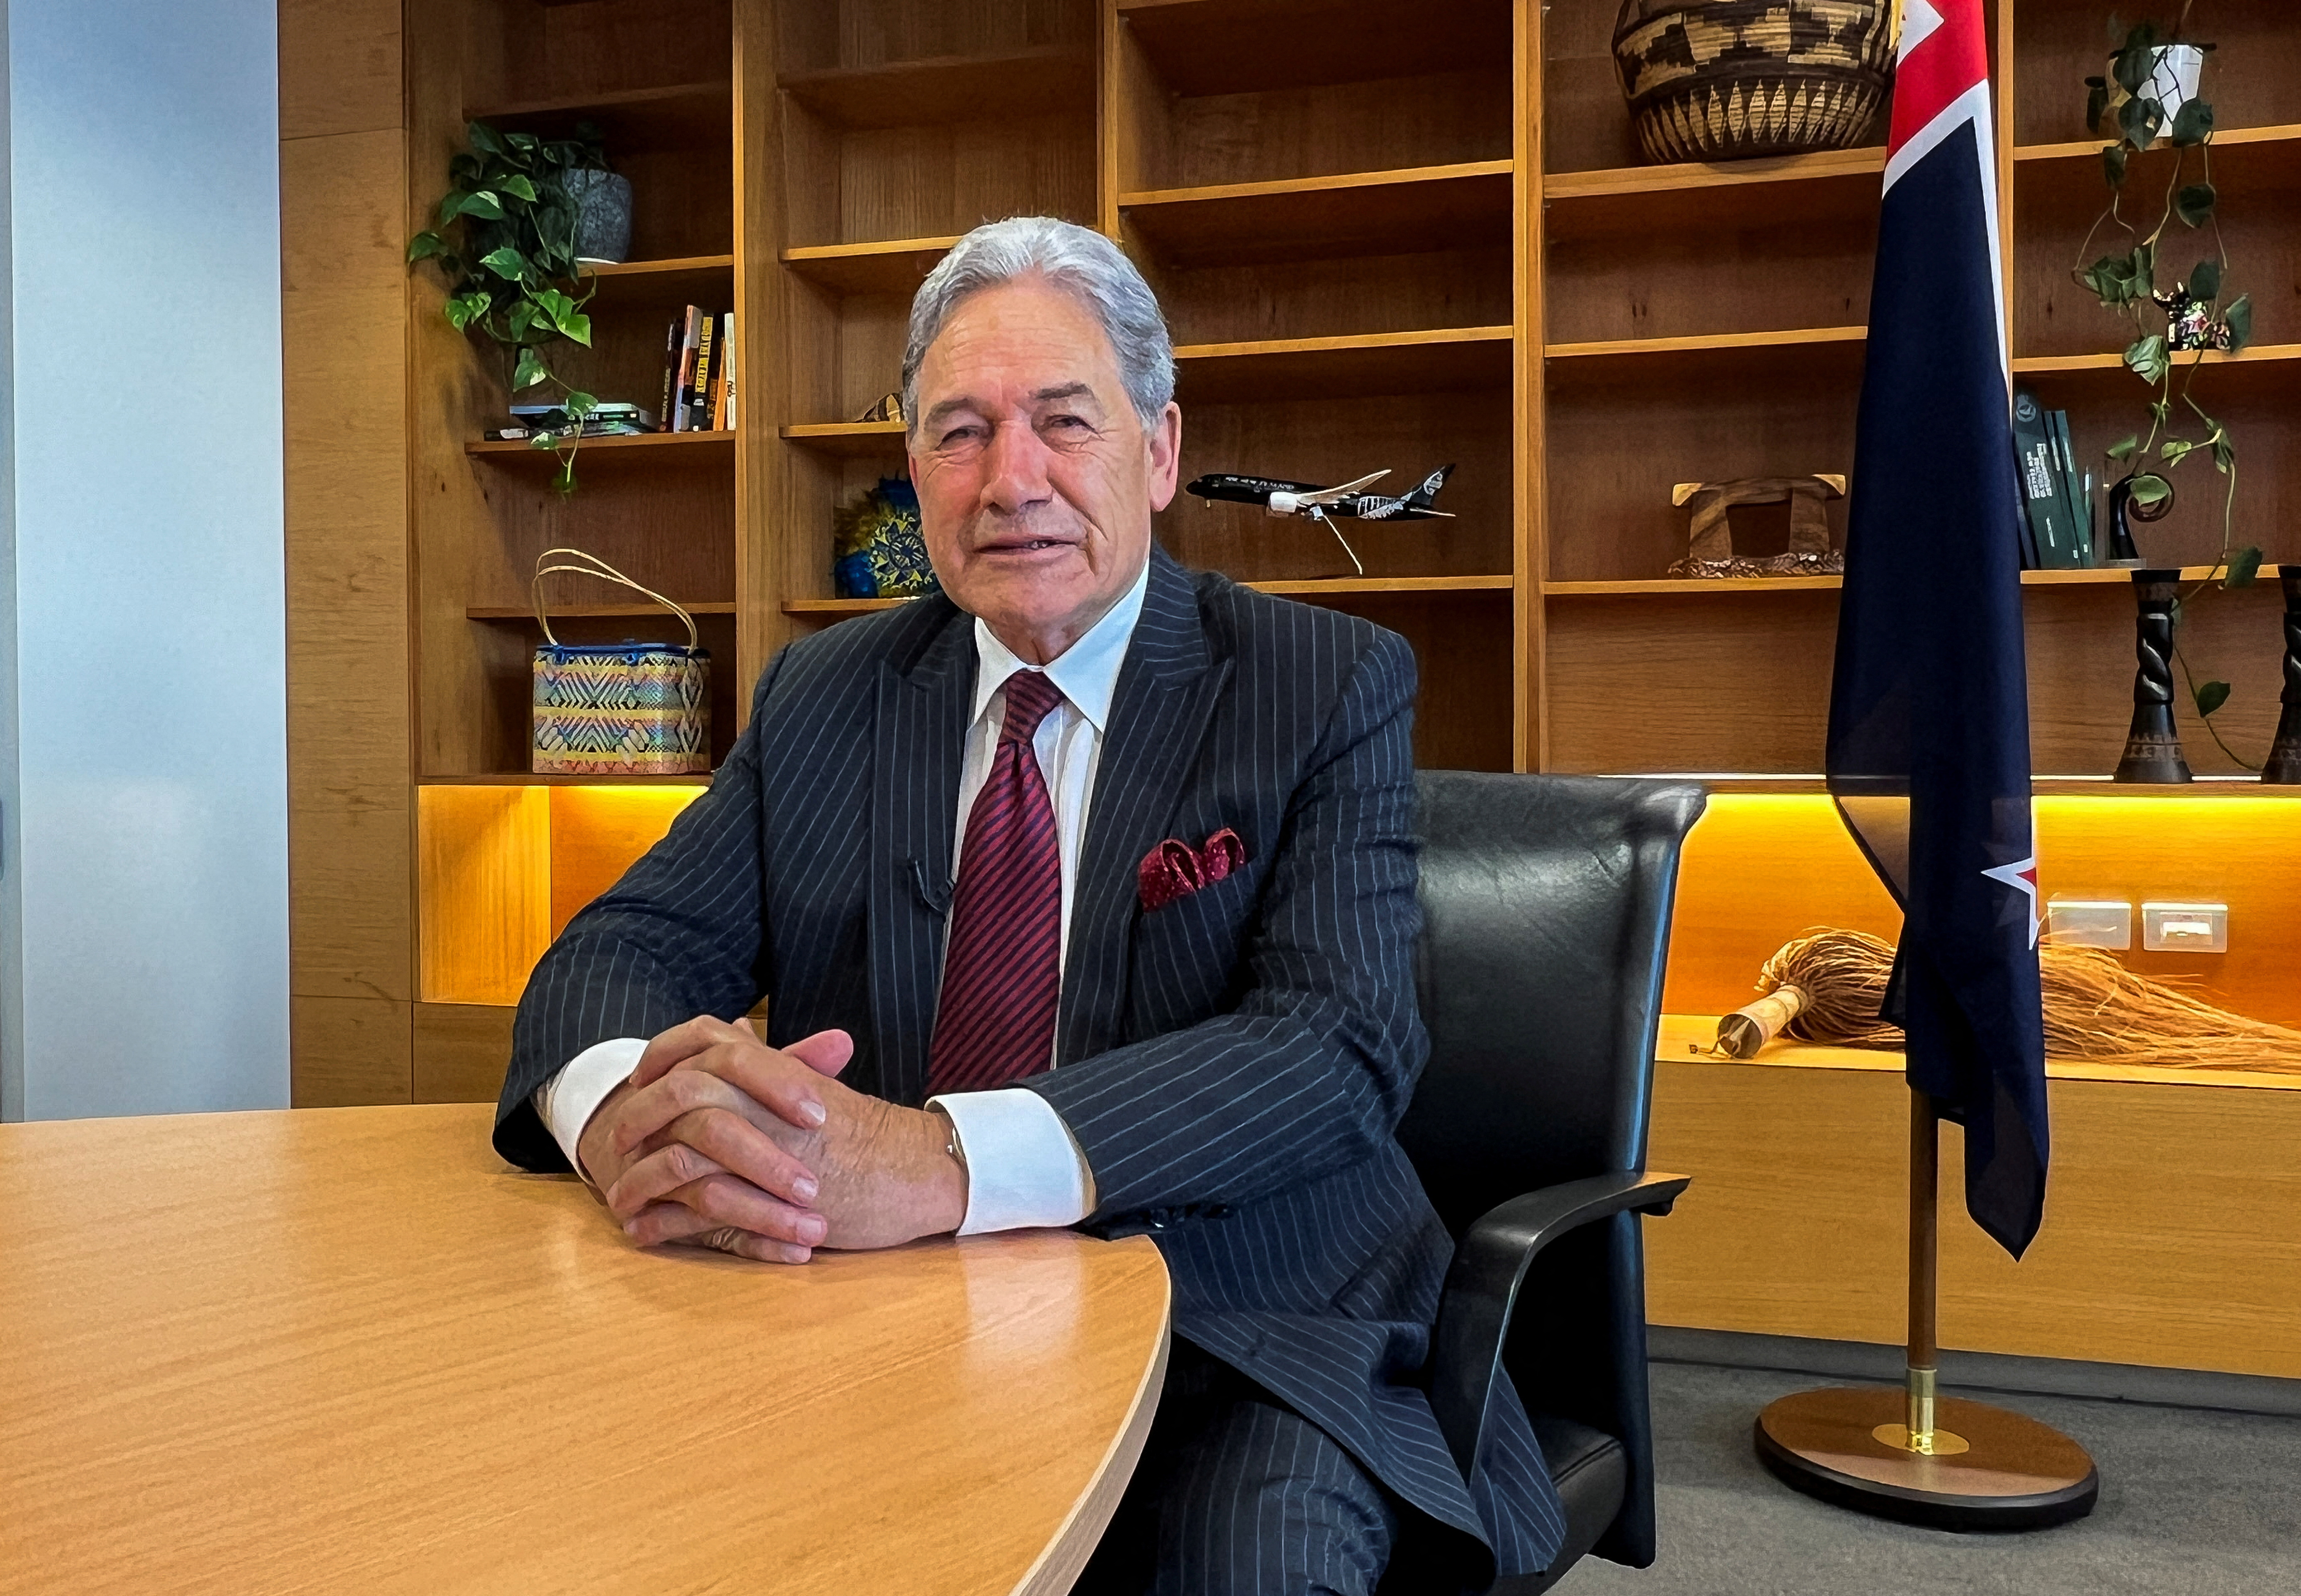 New Zealand's Foreign Minister Winston Peters poses for a picture in Wellington